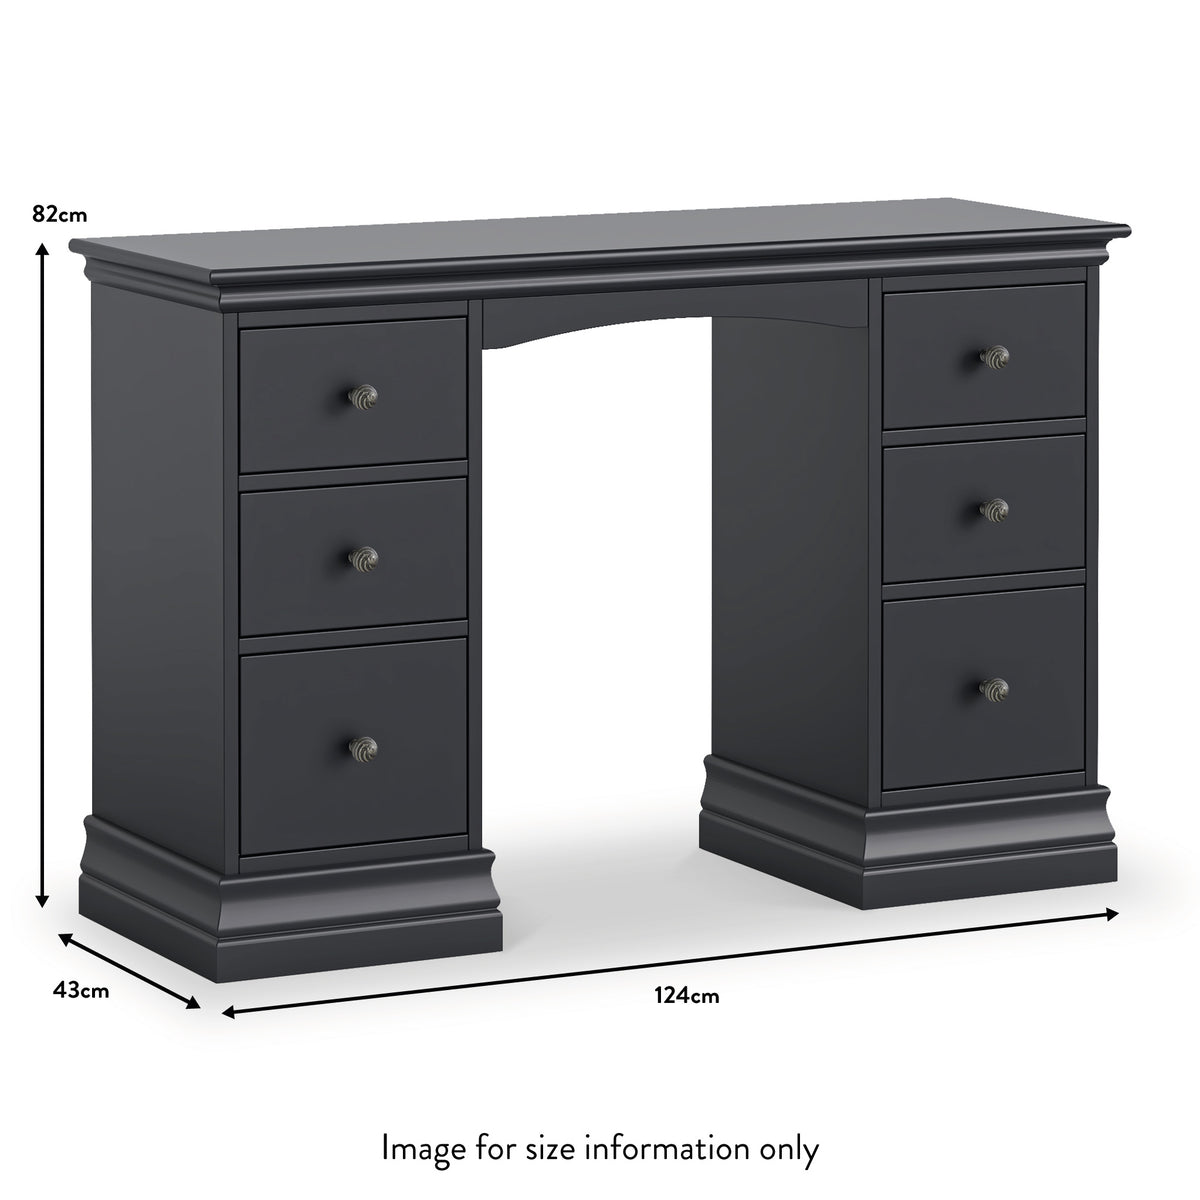 Porter Charcoal 6 Drawer Storage Dressing Table dimensions